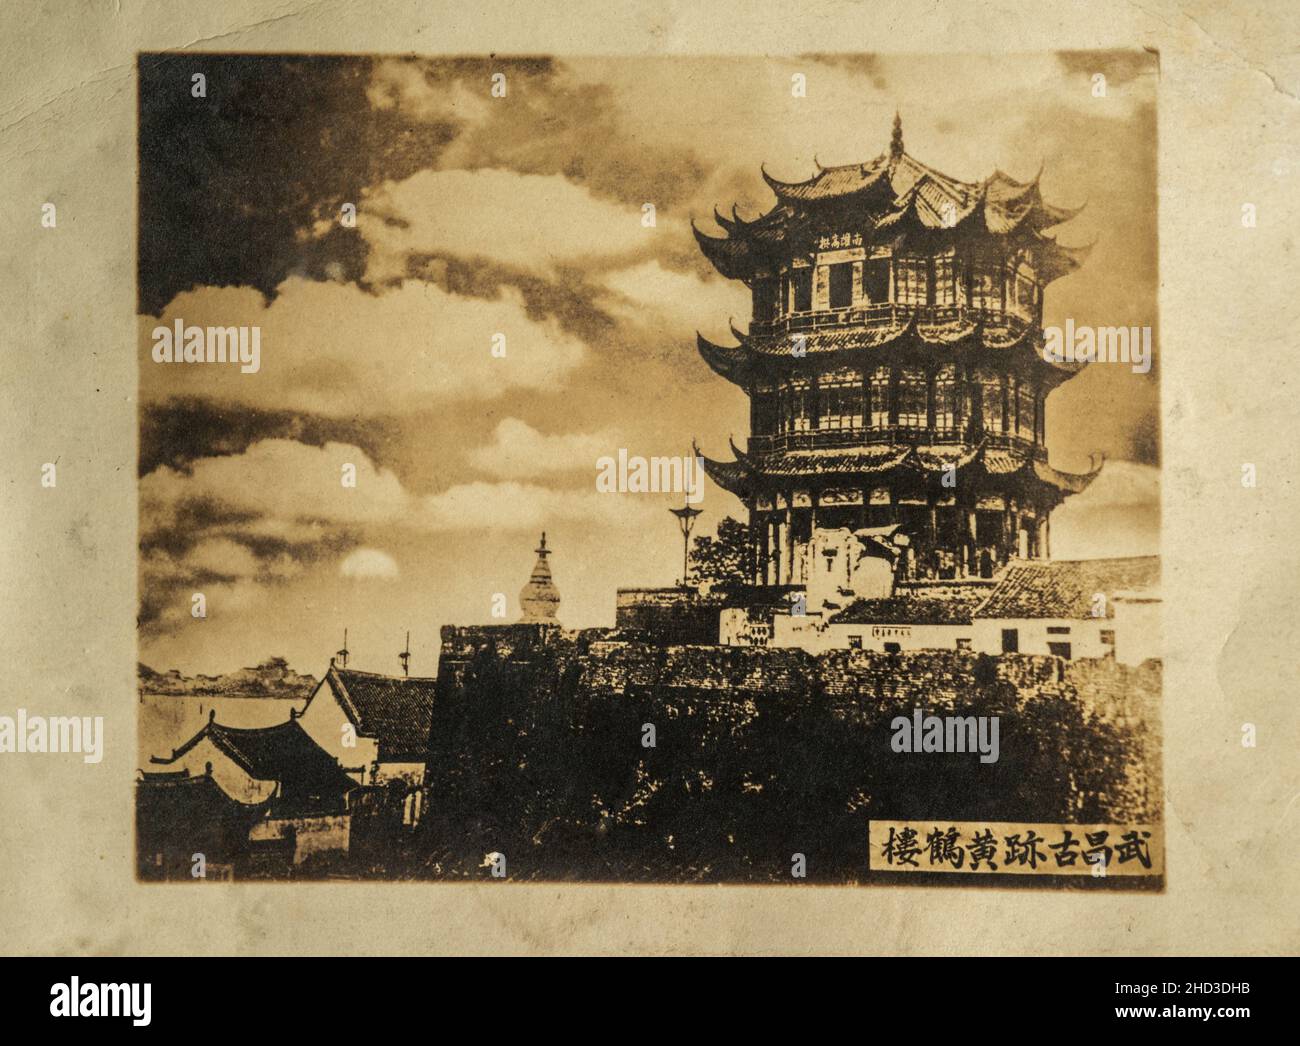 An old photo of the Yellow Crane Tower during Qing Dynasty. This version of the Yellow Crane Tower was built in 1868 and destroyed in 1884. Stock Photo